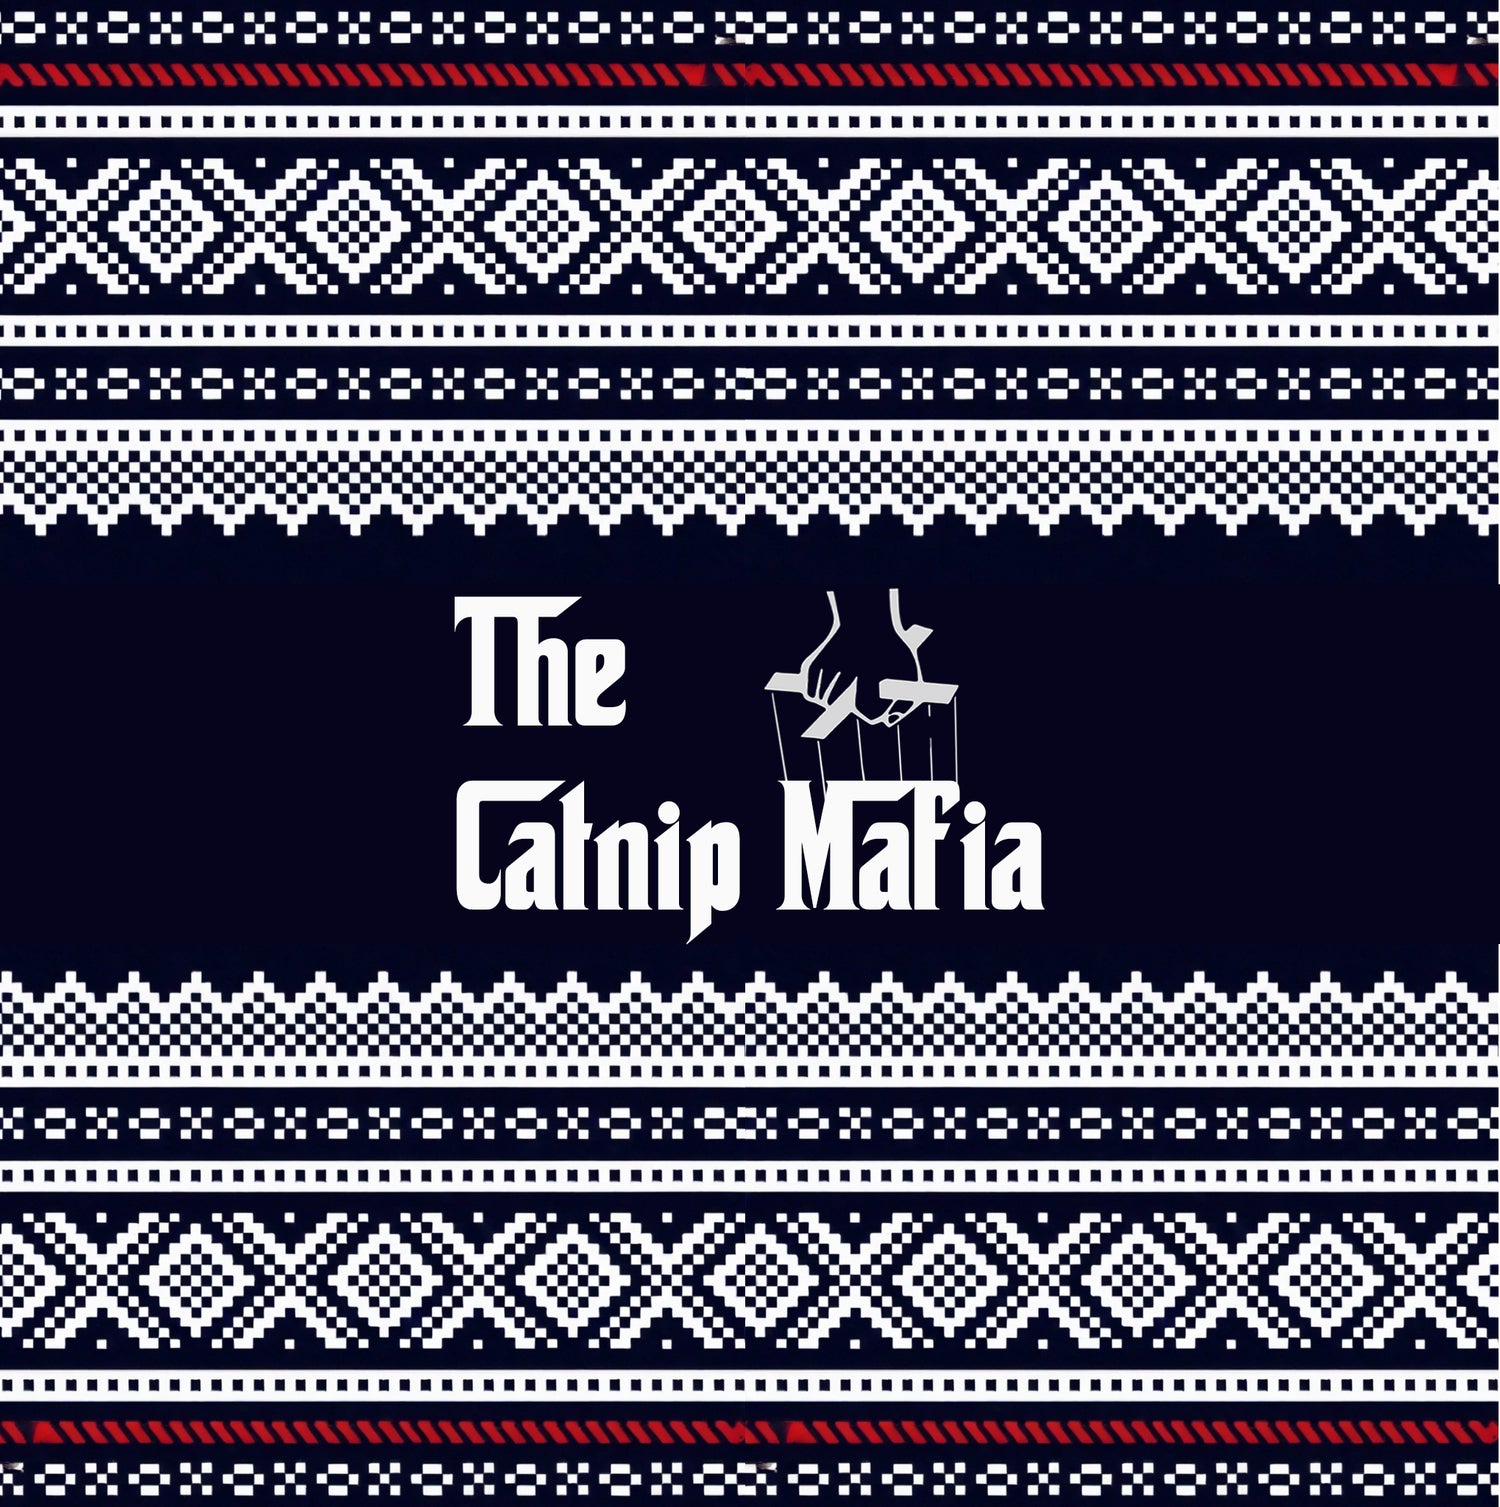 The Catnip Mafia invites you to be part of a movement that celebrates the fusion of tradition and innovation